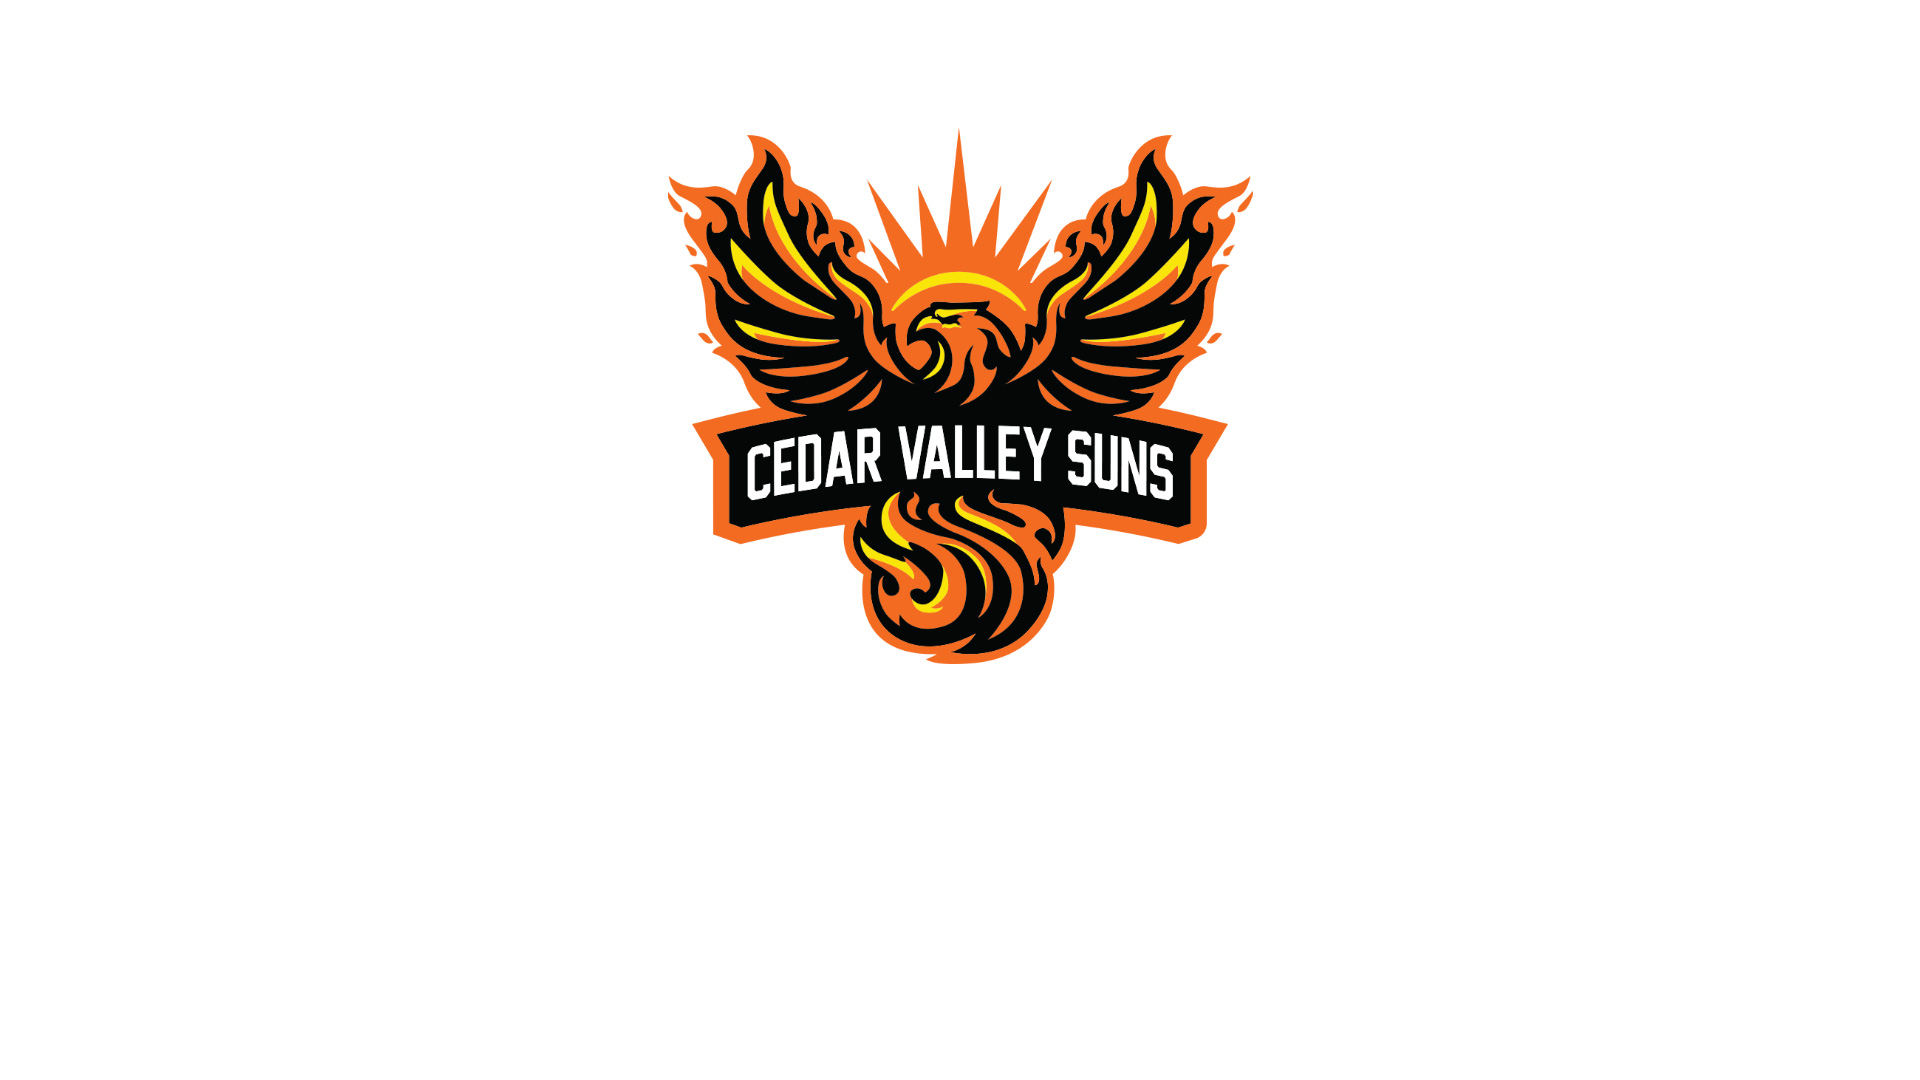 Cedar Valley College Suns are proud to introduce &ldquo;Suntastic Intramurals and Wellness&rdquo;.